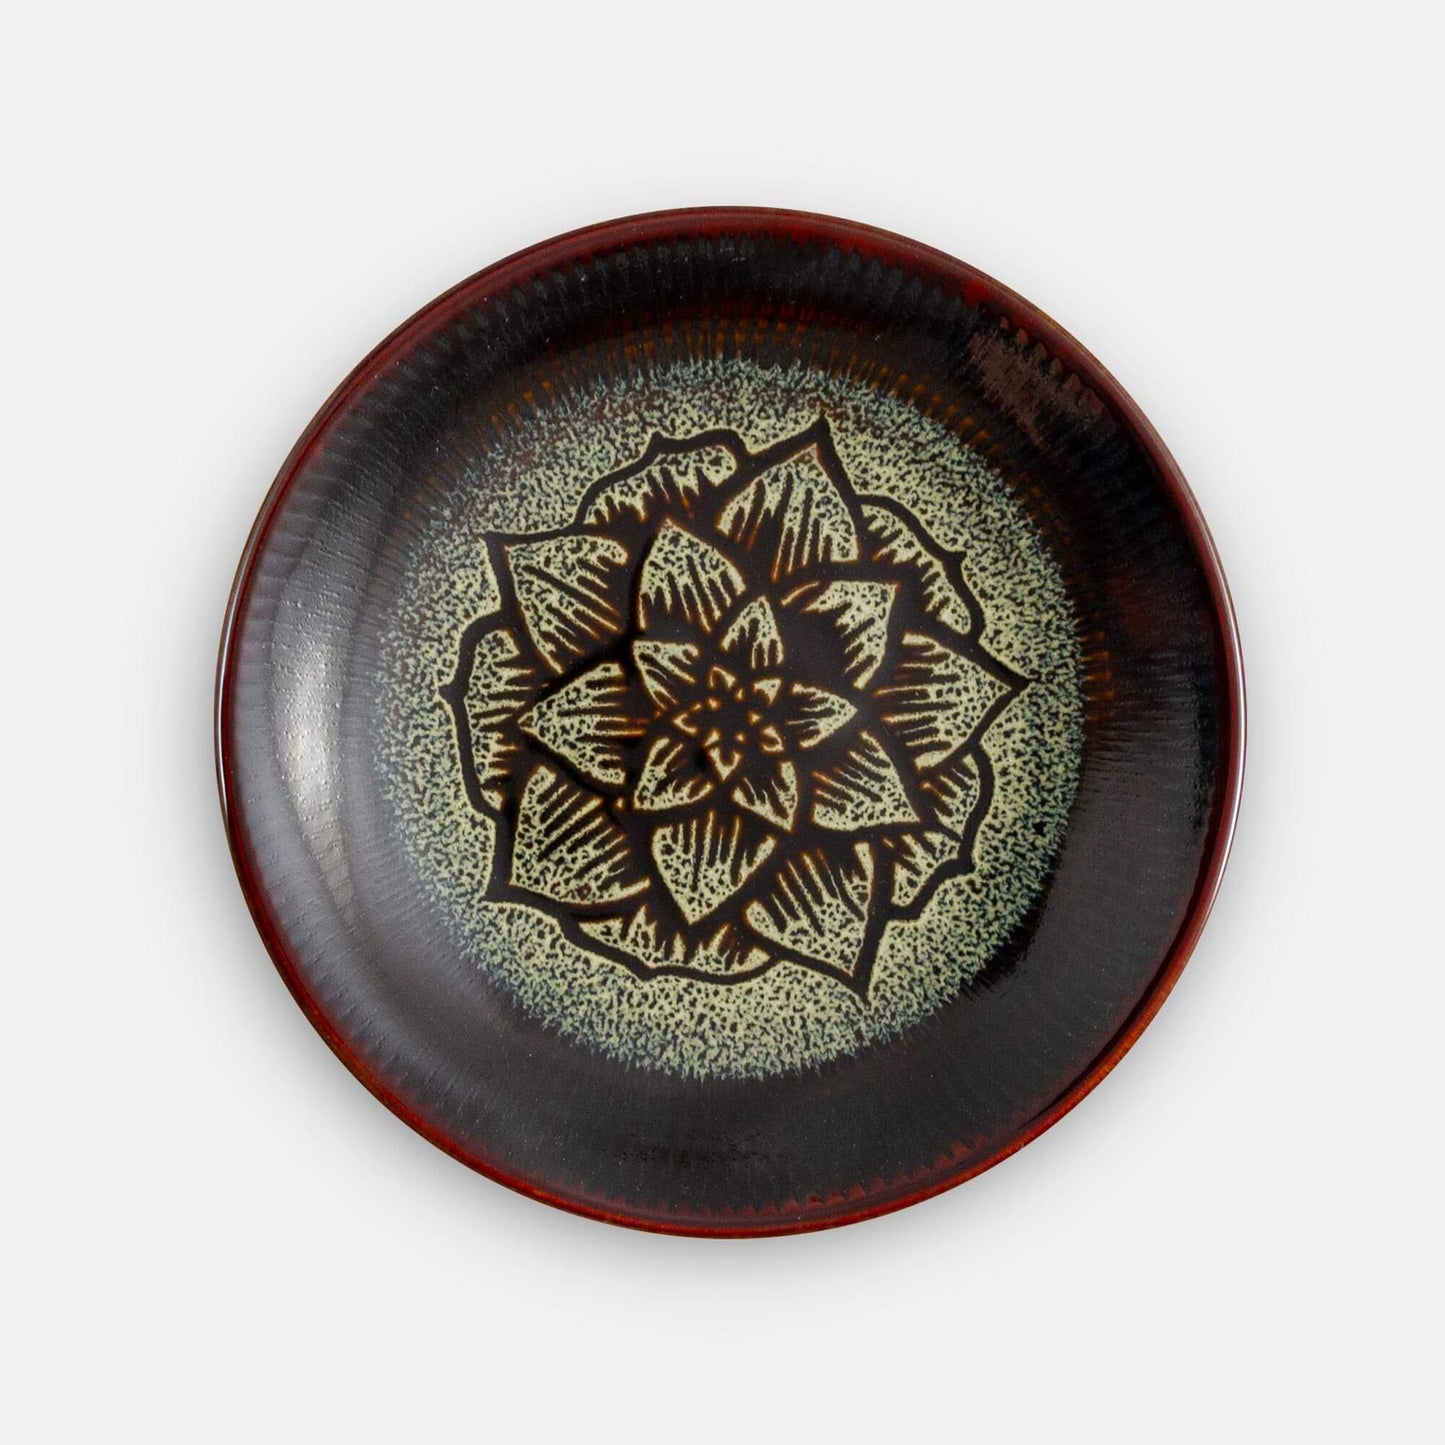 Handmade Pottery Rimless Dessert Plate made by Georgetown Pottery in Maine in Hamada Celtic Rose Pattern